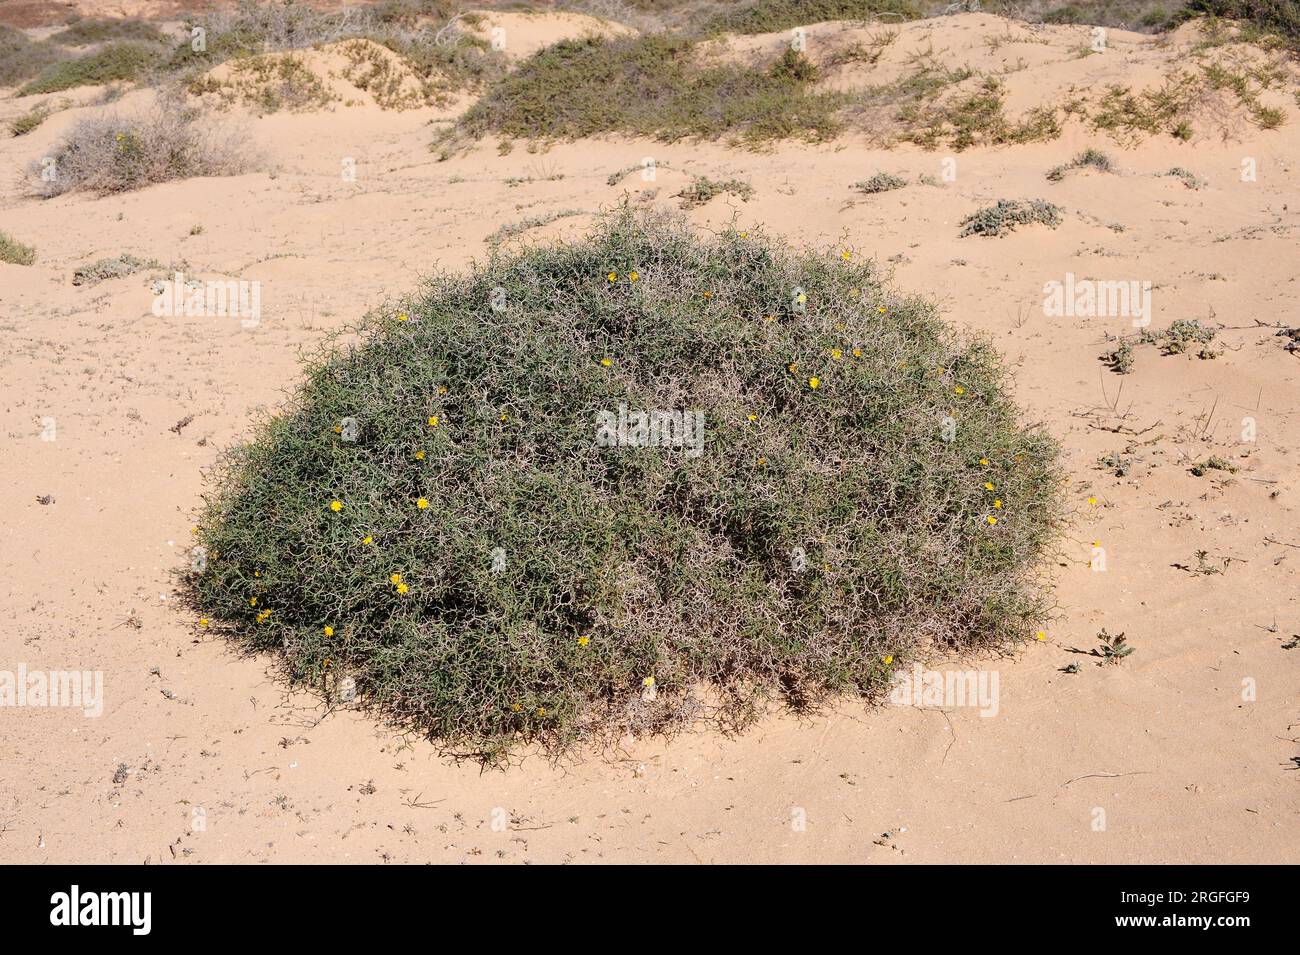 Aulaga, cardaviejo or rascaviejas (Launaea arborescens) is a dense and prickly shrub native of Canary Islands, North-west of Africa and southeast  Spa Stock Photo